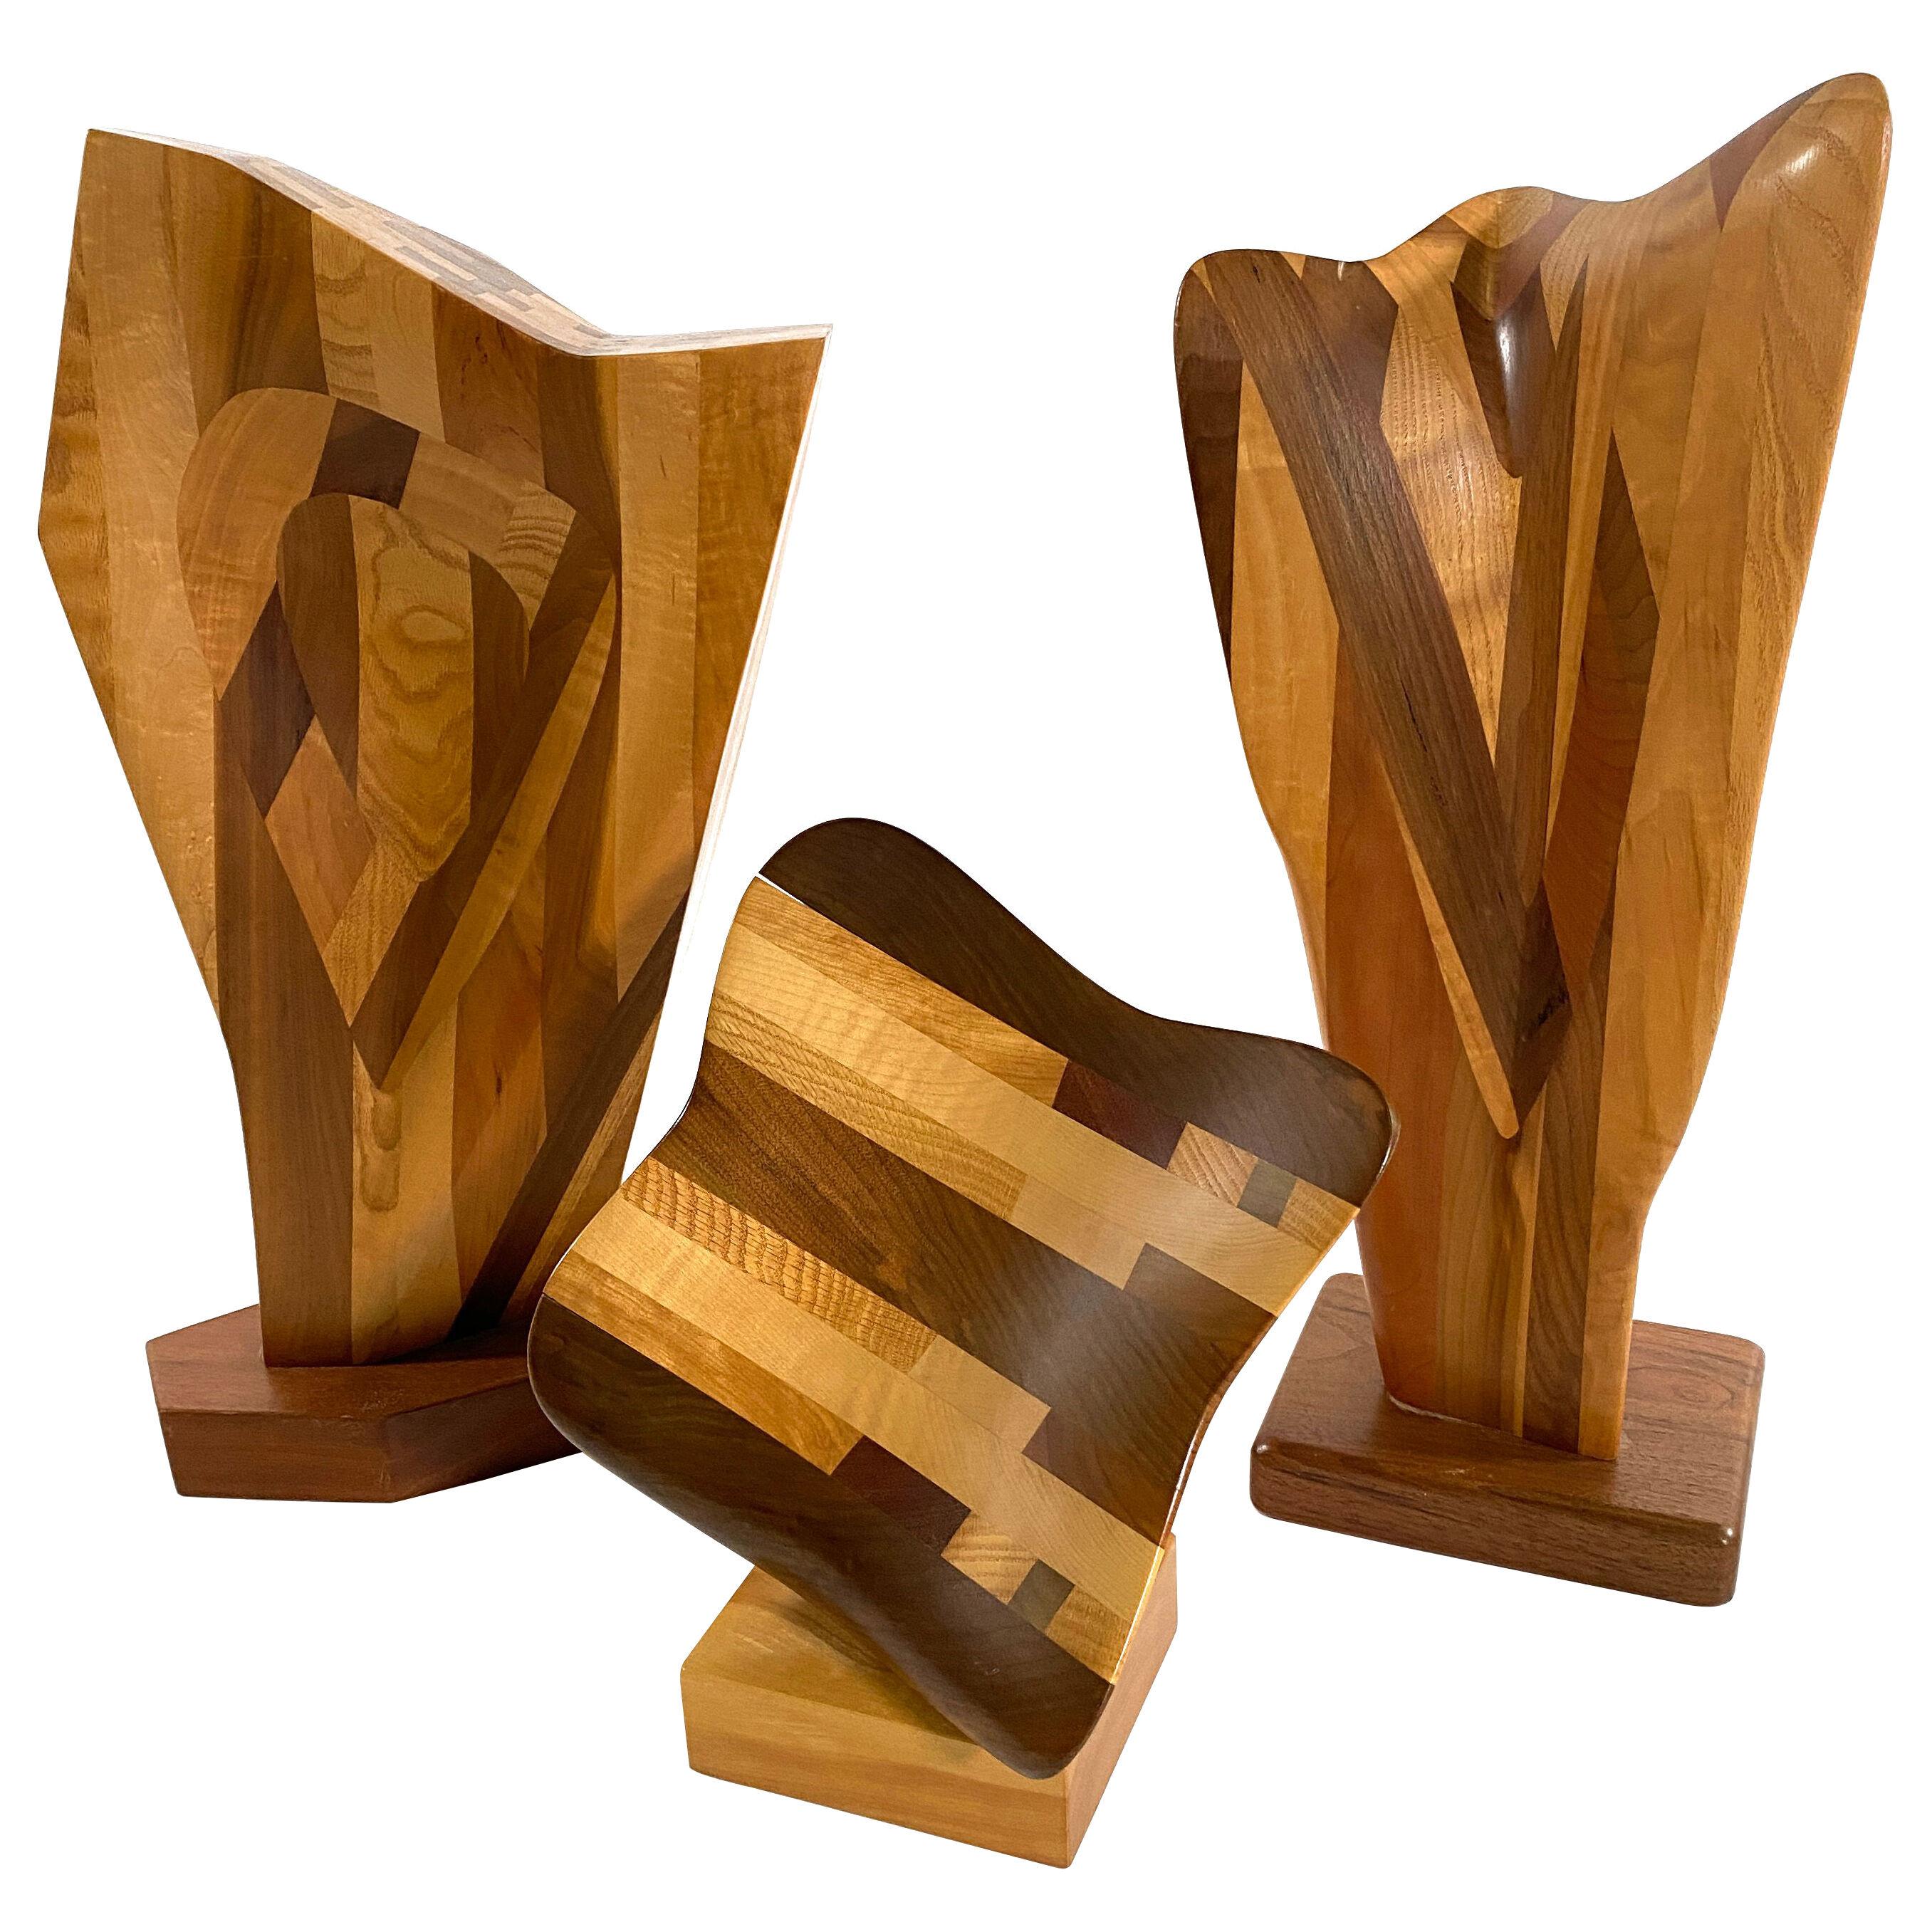 Set of 3 American Modern Abstract Mixed Exotic Wood Sculptures, Paul LaMontagne